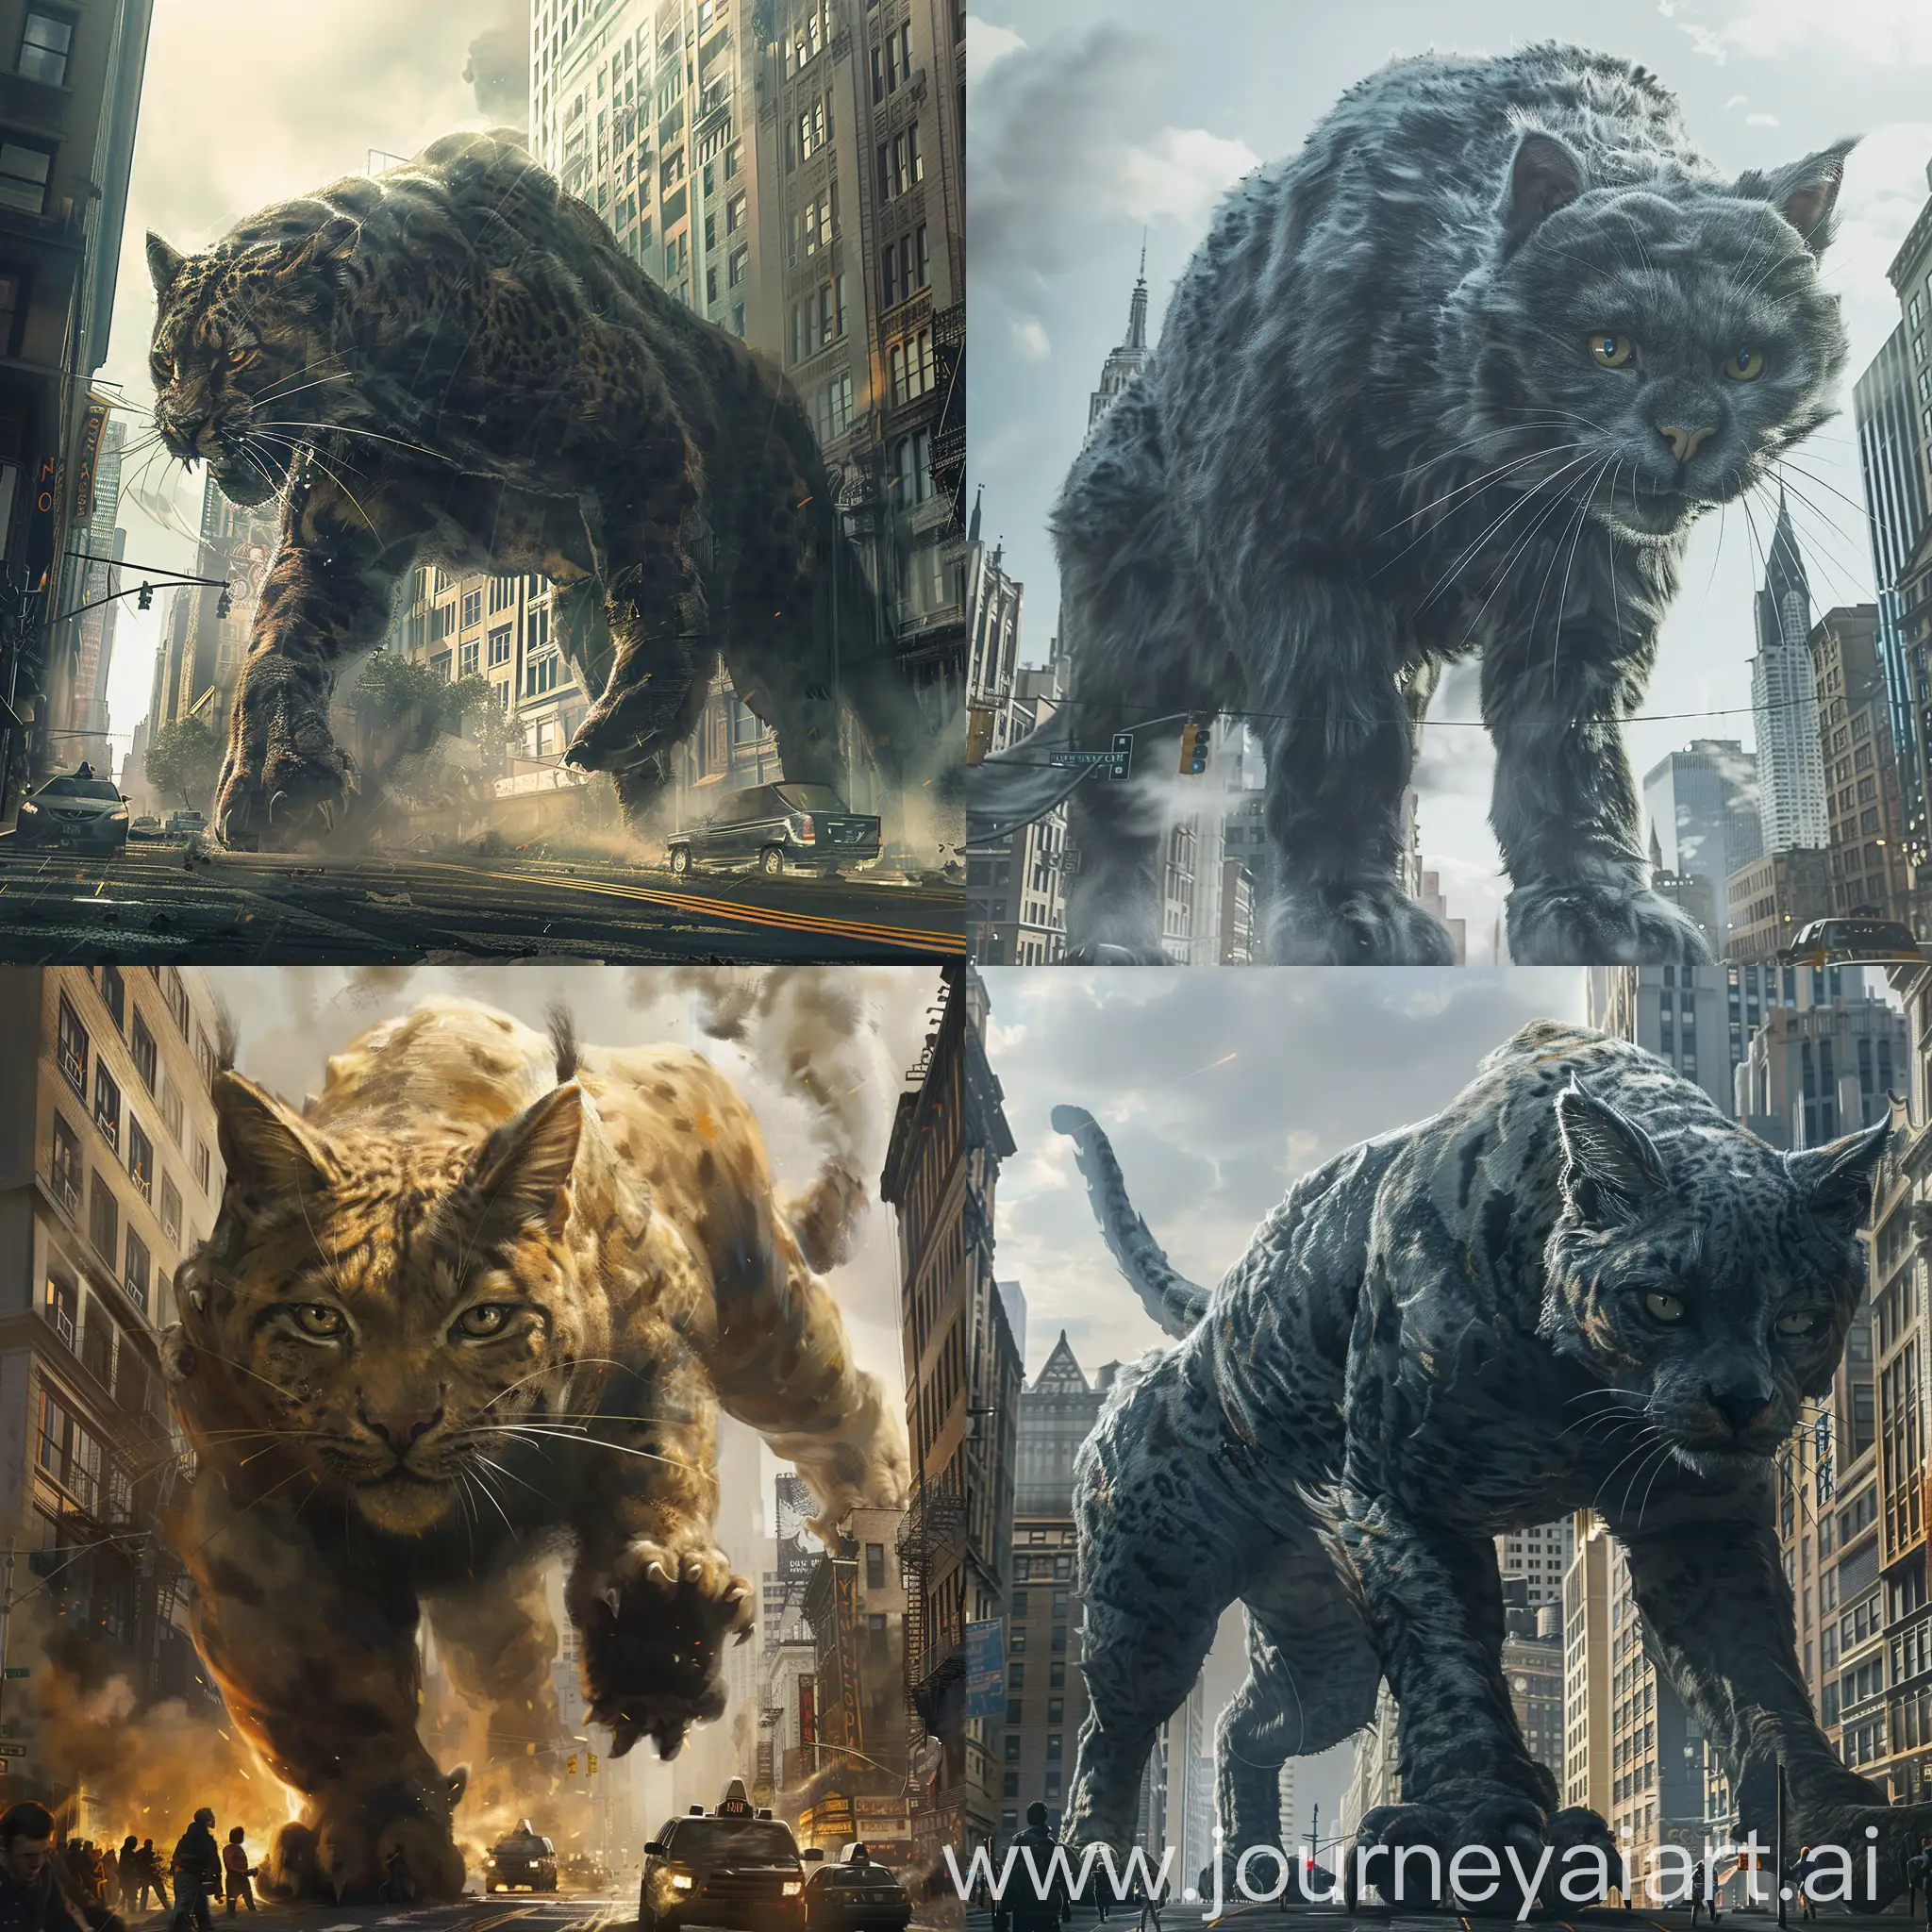 As the colossal cat prowls through the city streets, its sheer size and power are unmatched. Detail the struggles of the citizens as they try to evacuate while authorities devise a plan to subdue the gigantic threat looming over their homes